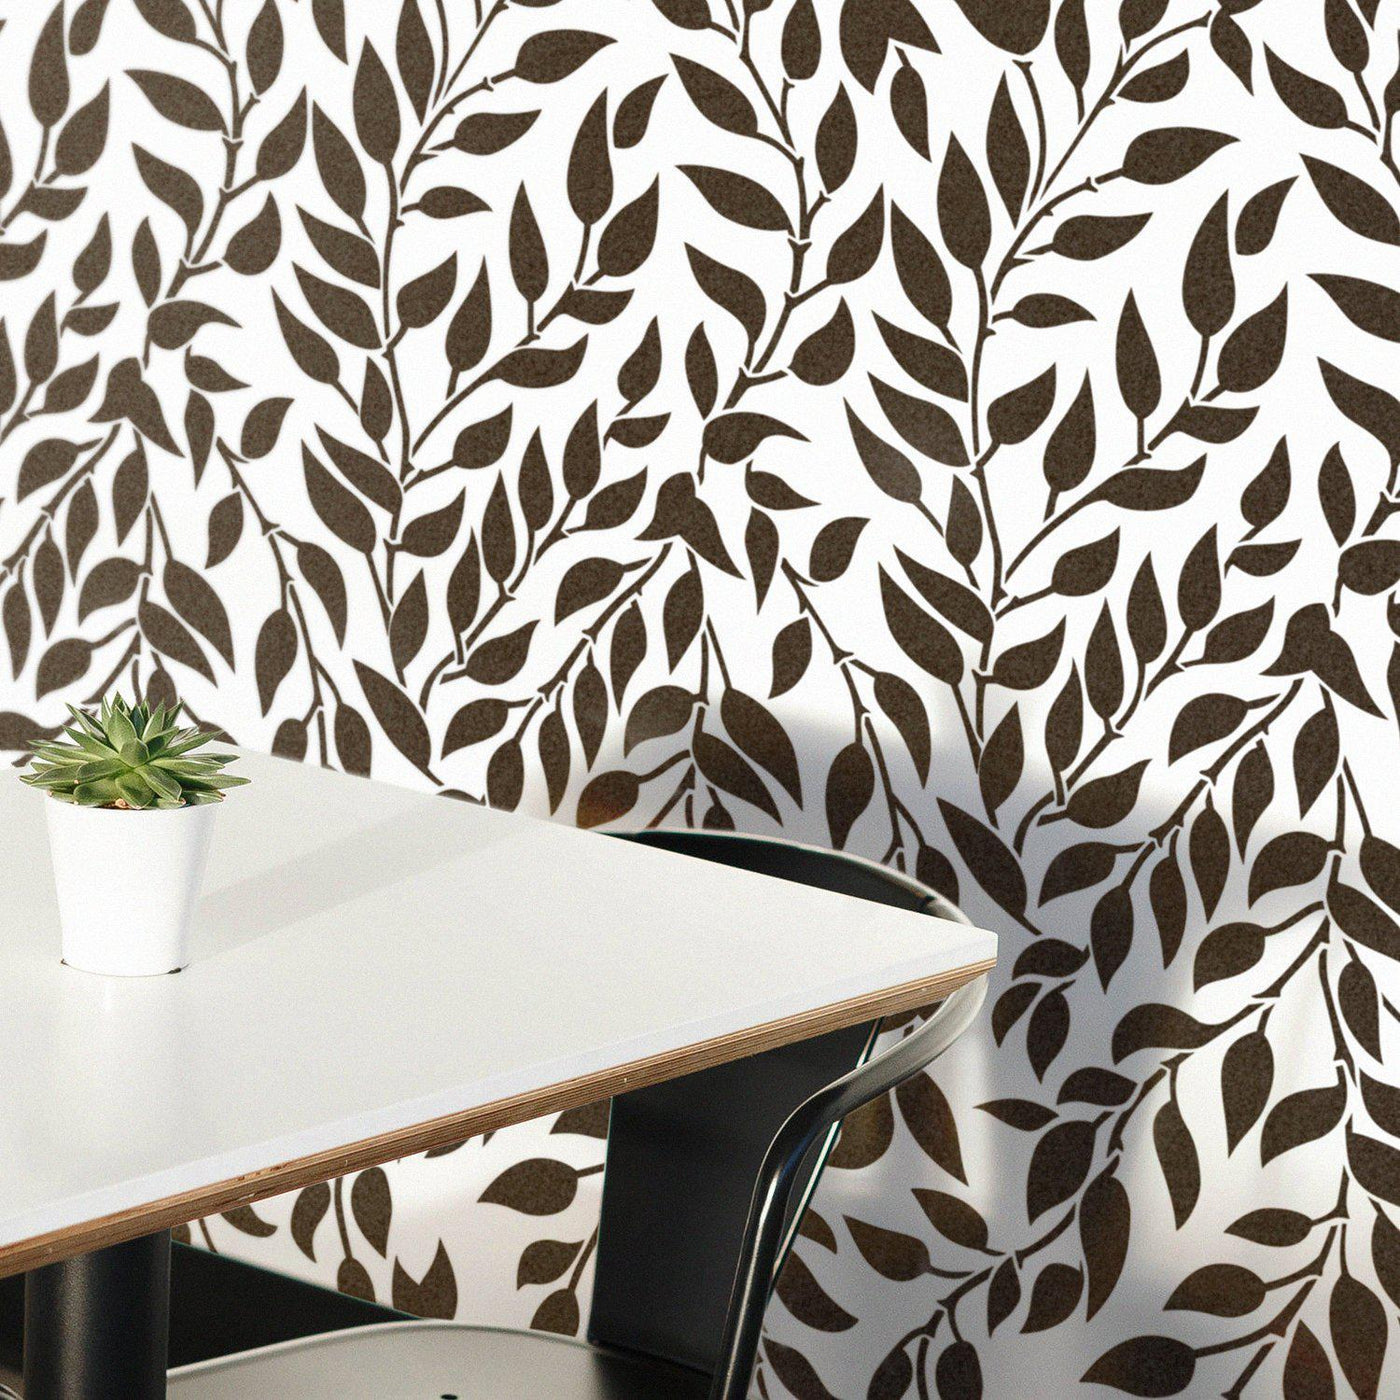 Extra Large Floral Wall Stencil- Leafs Pattern Wall Stencils- SPRING